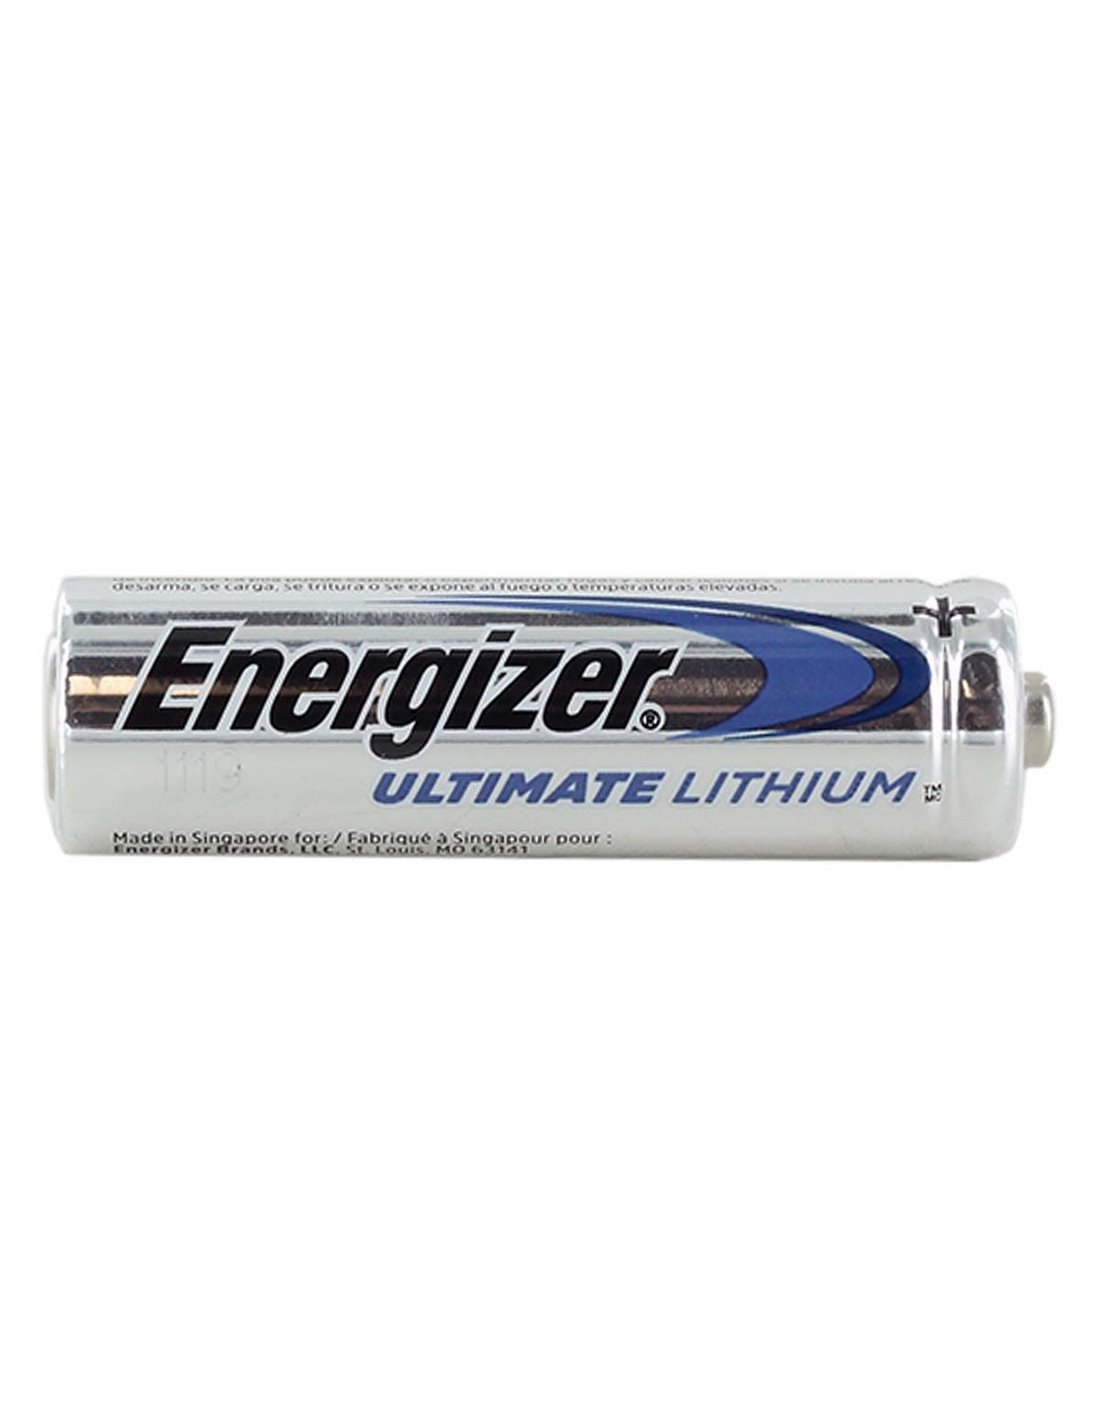 L91 Energizer AA Ultimate Lithium Battery 1.5V extra long runtime 3000Mah - Non Rechargeable